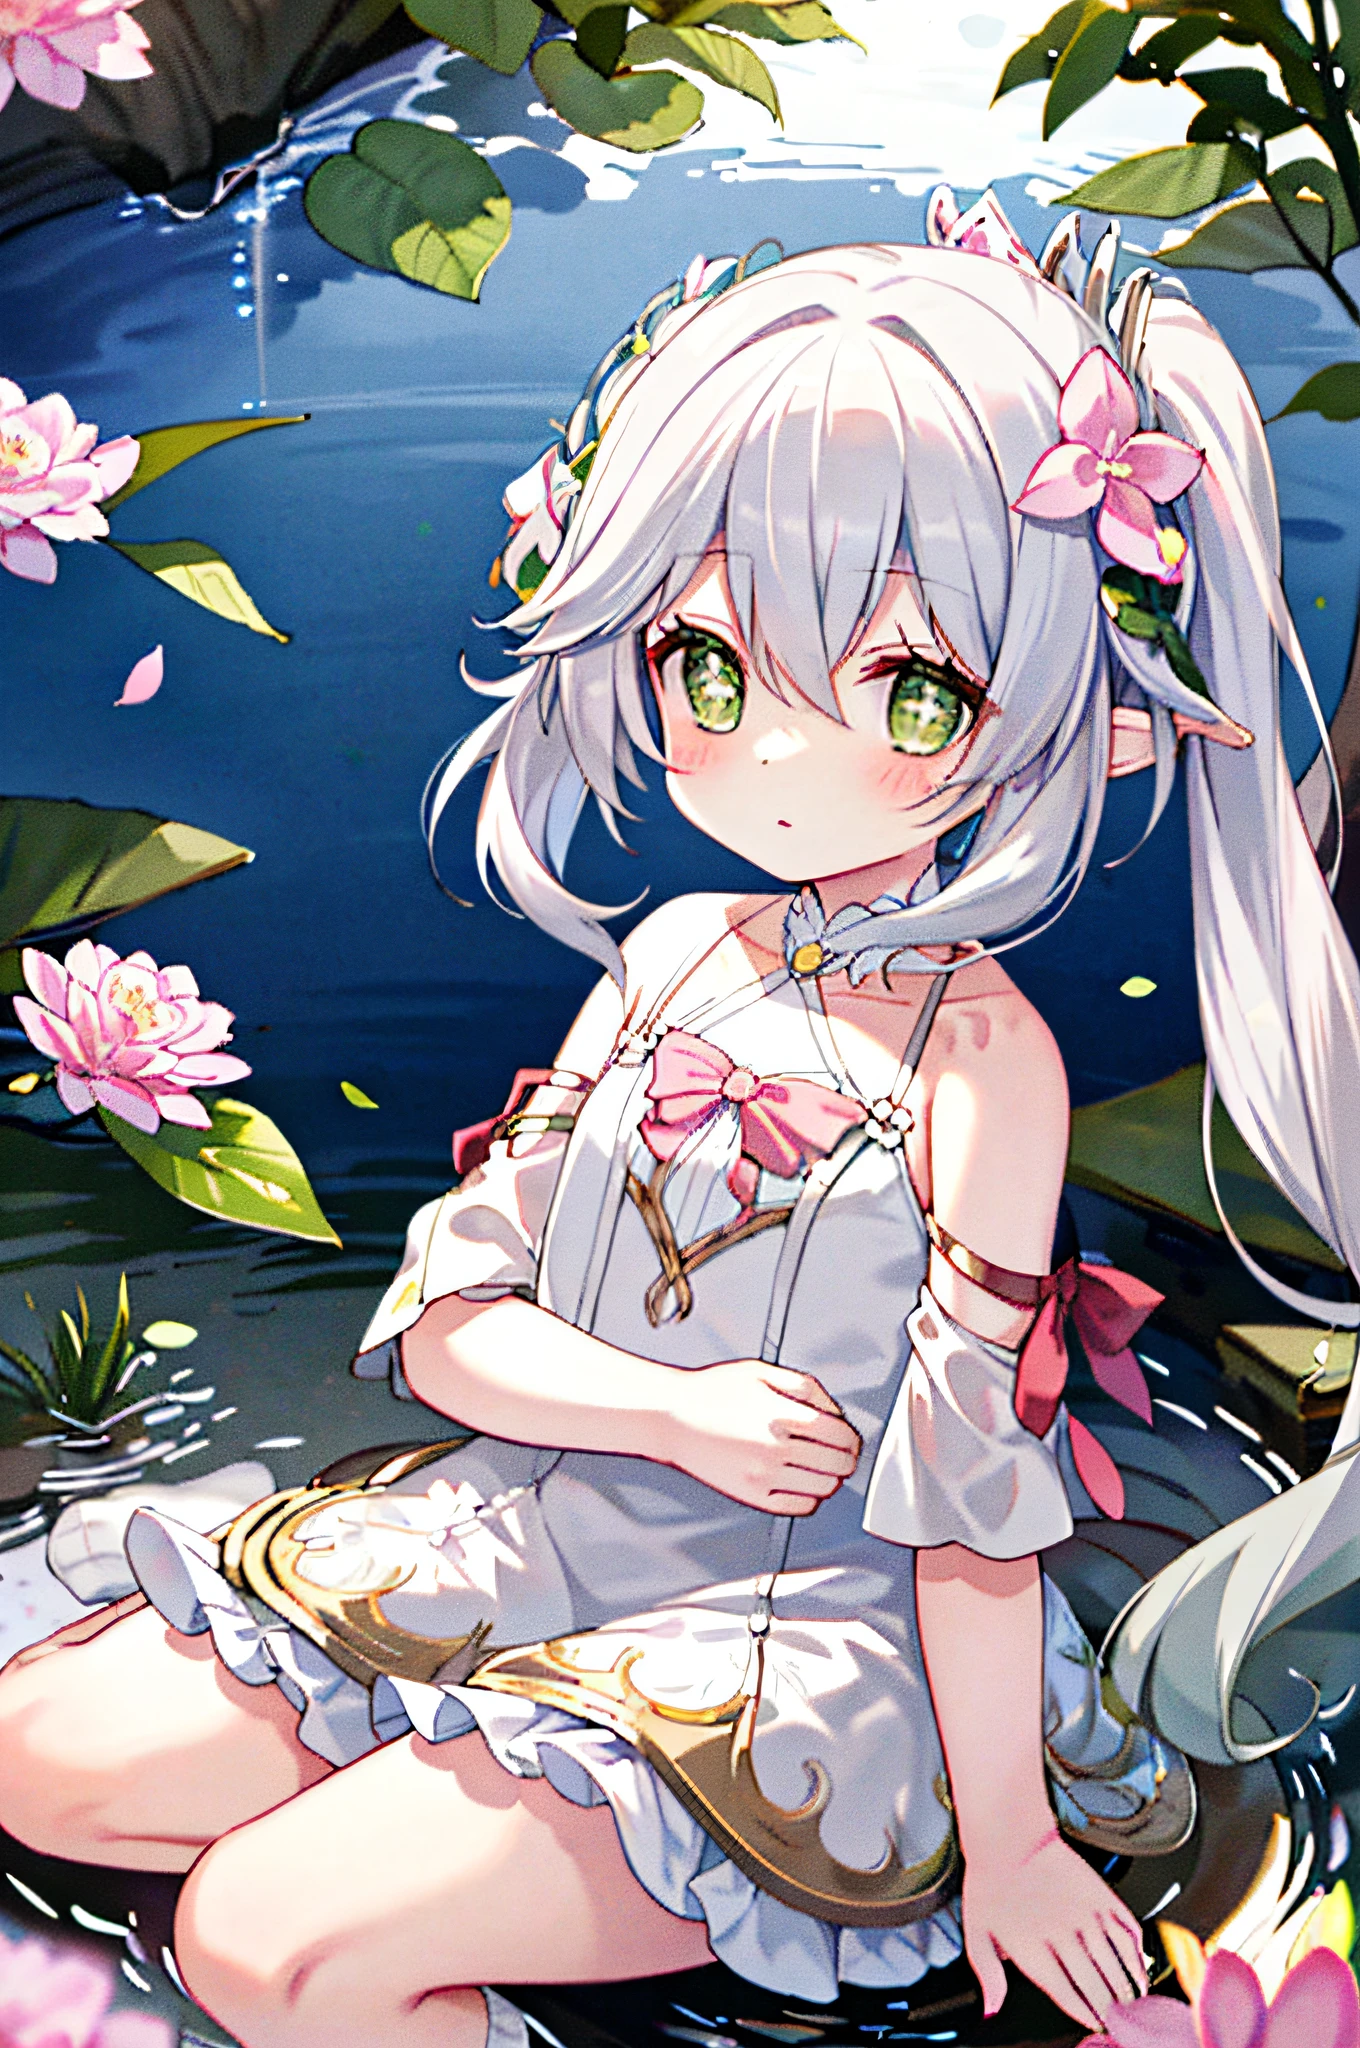 (sitting), (bow), (silver hair), (short hair), (light green eyes), hreat in the eyes, (four-petaled white flower hair ornament: 1.1), (blush), bangs, (a girl in [(nightgown):(((without socks))): 0.4] : 1.2), (bare shoulder), clavicle, (white thighs: 1.2), frilly sleeves, looking at the viewer, [(night: 1.2), peaceful, sky, ((full moon)),stars, house, city, (in a courtyard), water drop,pond,(near pond), tree, flower request, wind: : 0.6 ], (lridescent light refraction), (floating pink petals: 1.2), dreamer